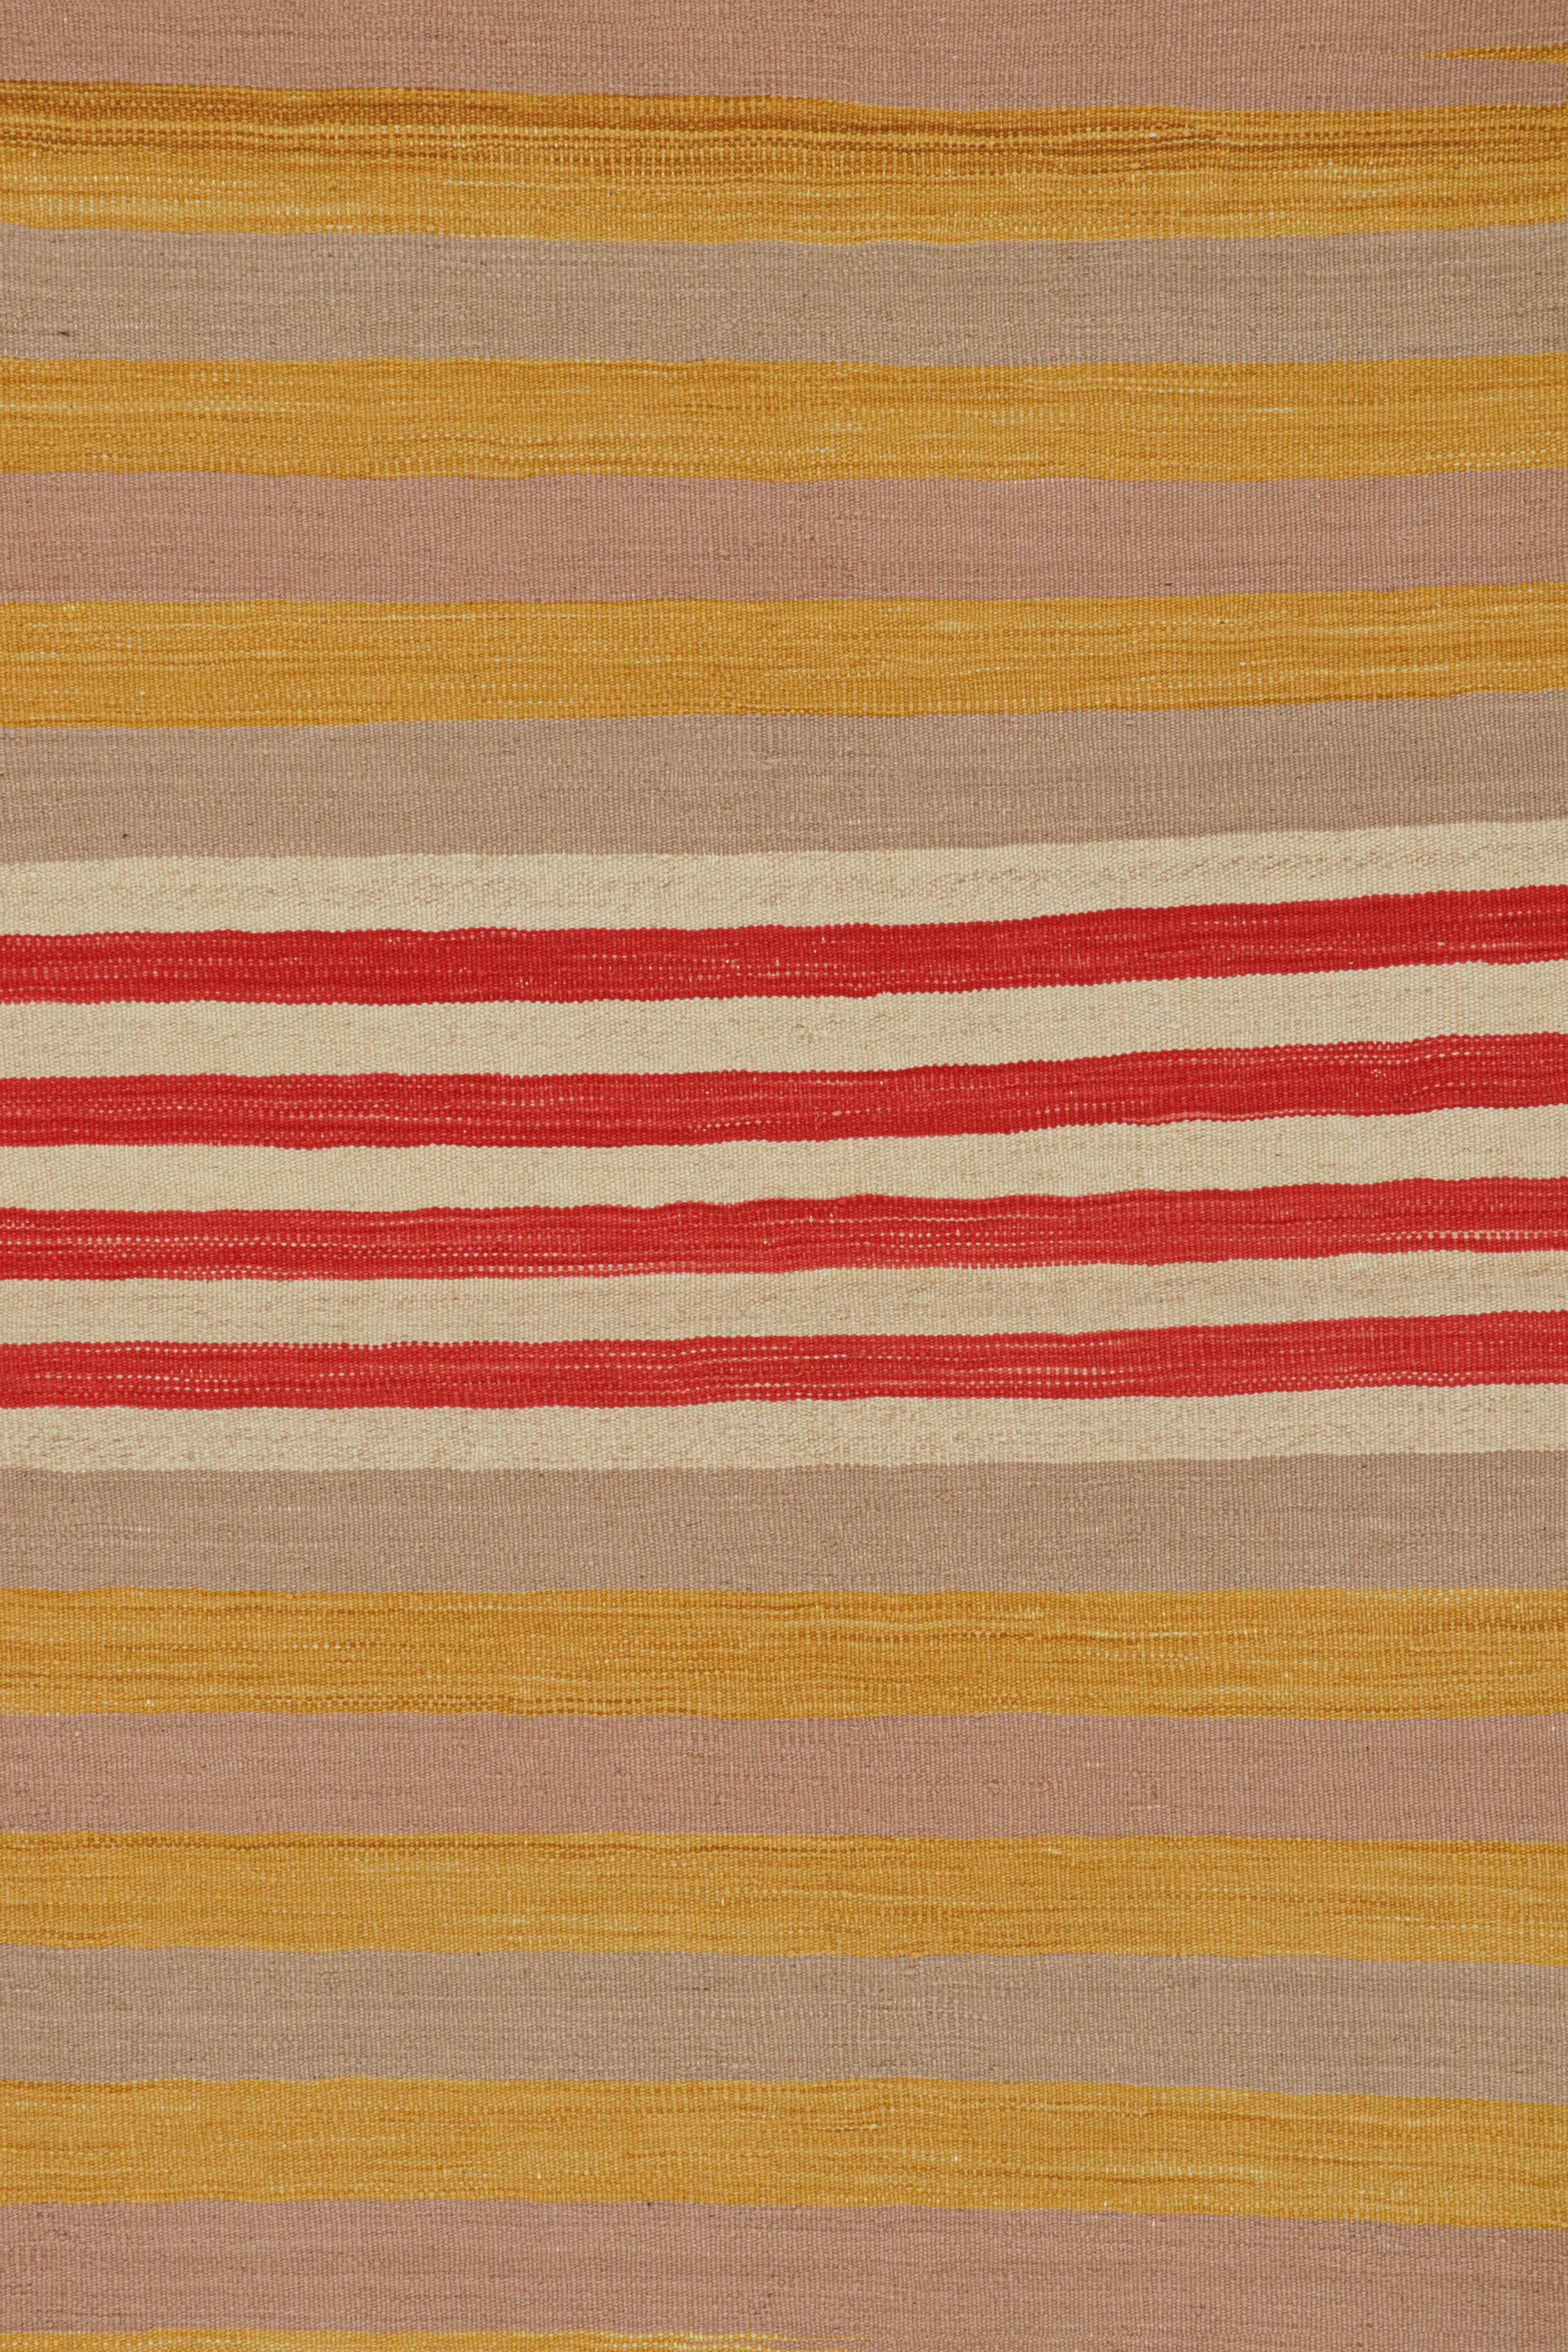 Mid-20th Century Vintage Kilim in Beige, Gold and Red Stripes